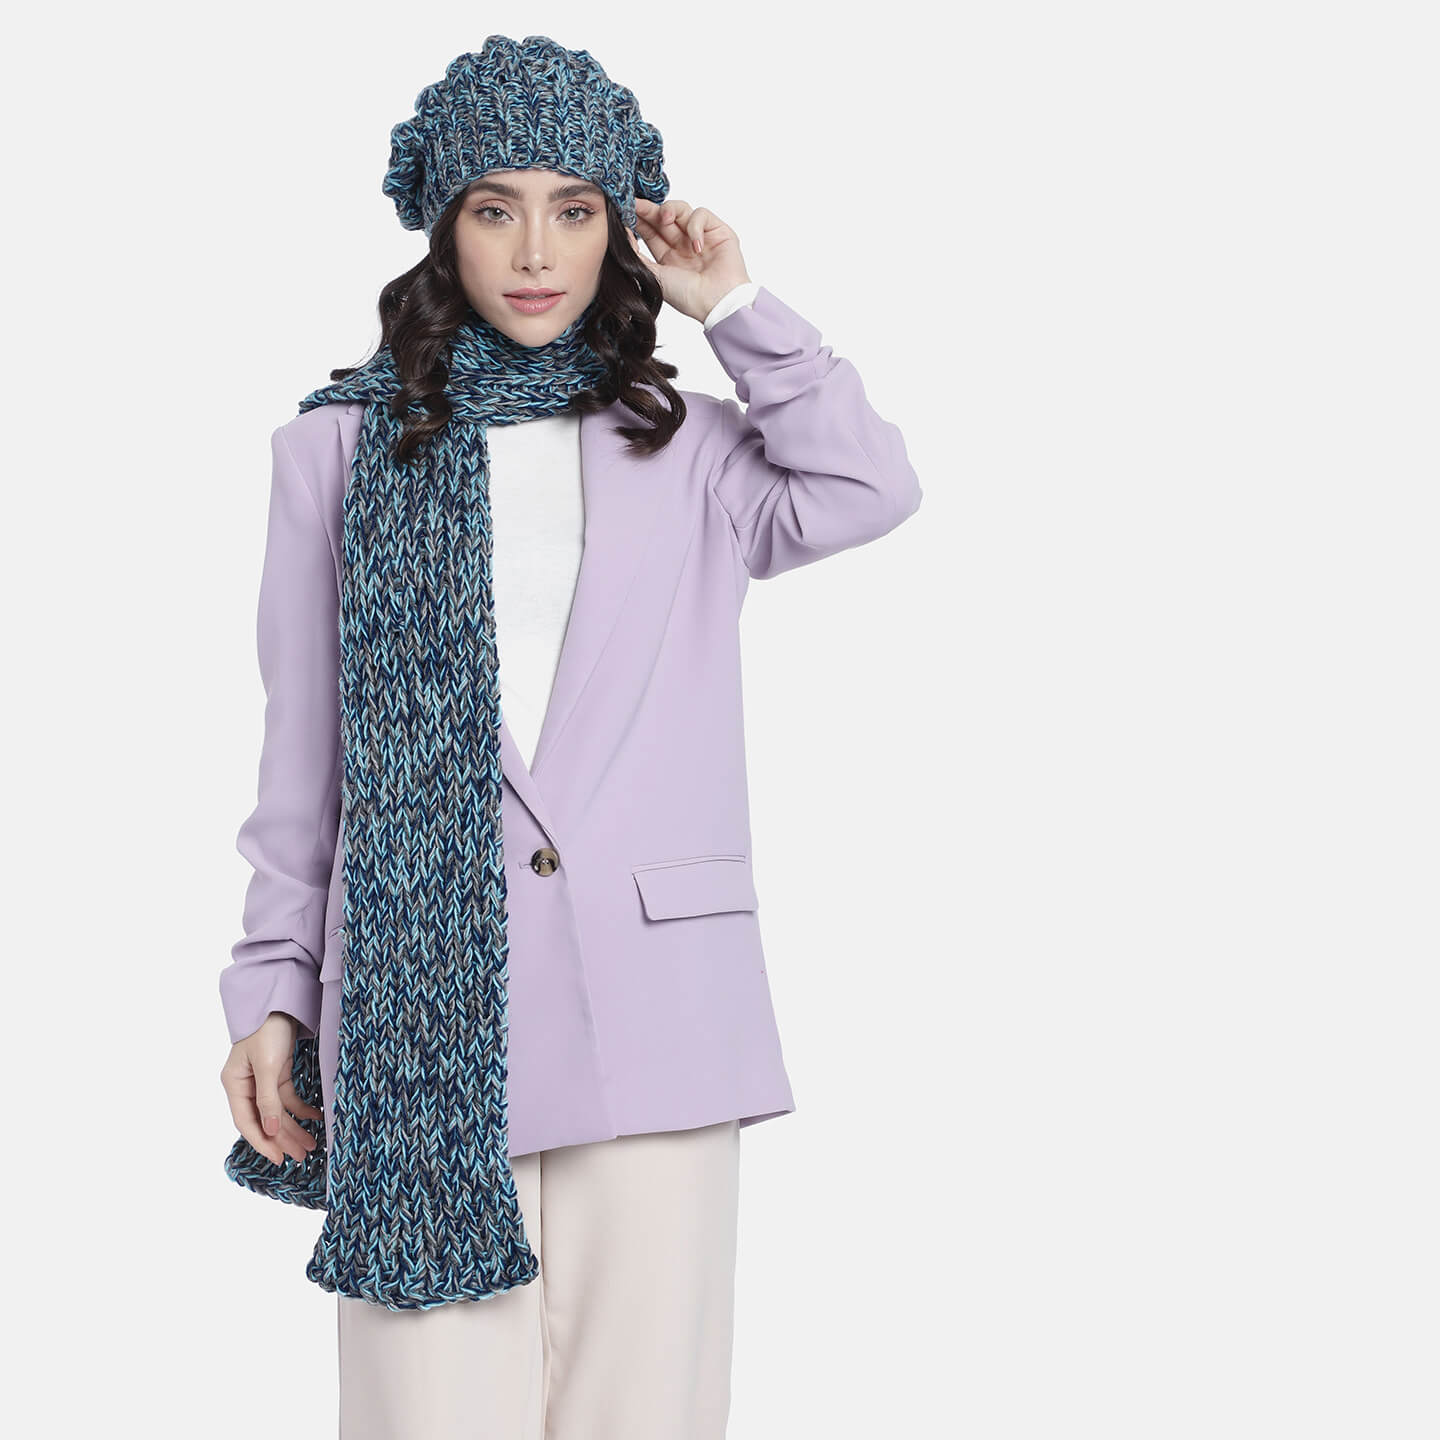 Beanie and Scarf Coordinating Set - 3214